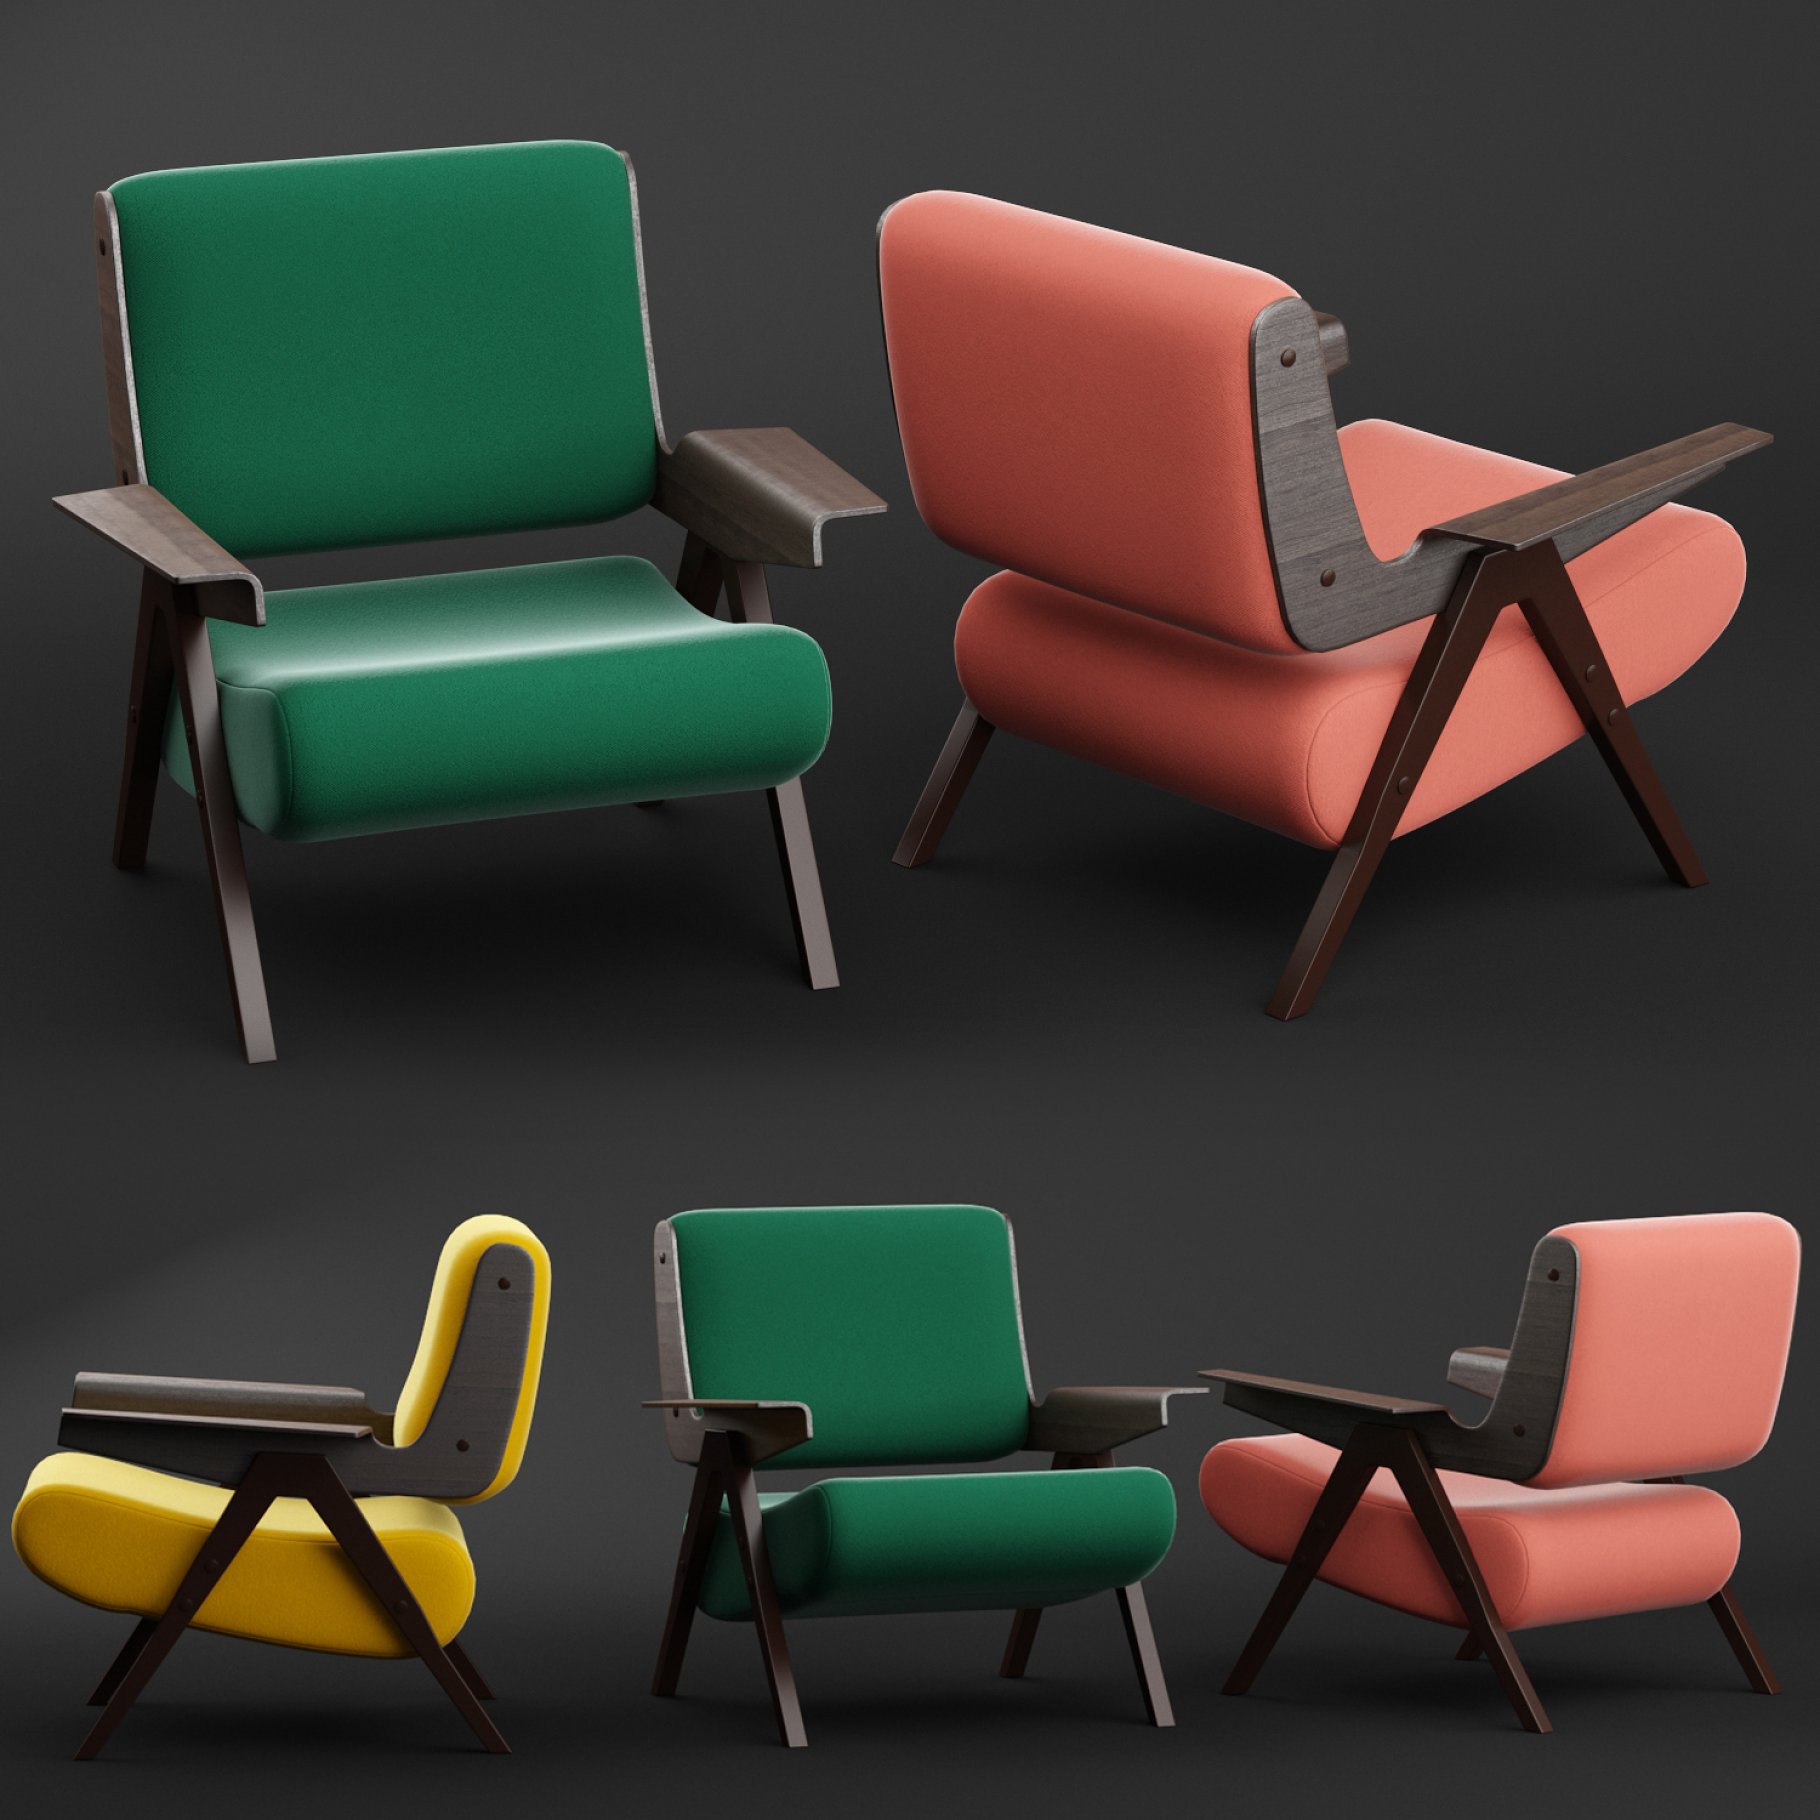 Image of different colored chairs.